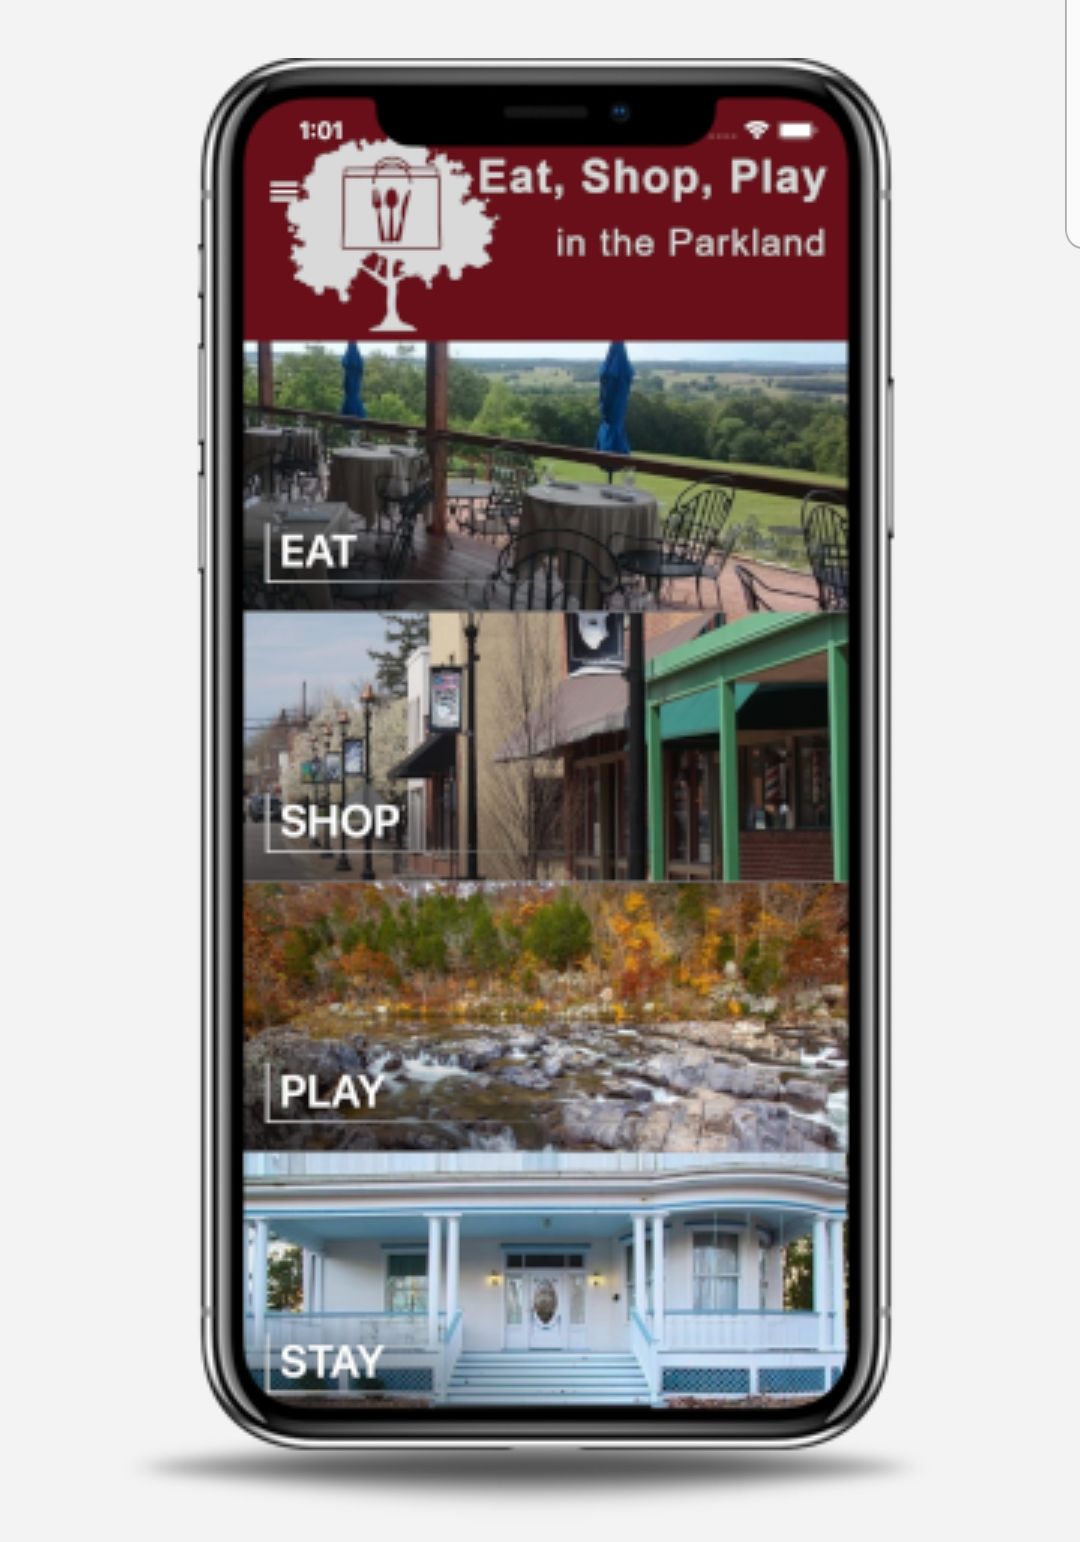 Eat Shop Play App from Parkland Chamber of Commerce